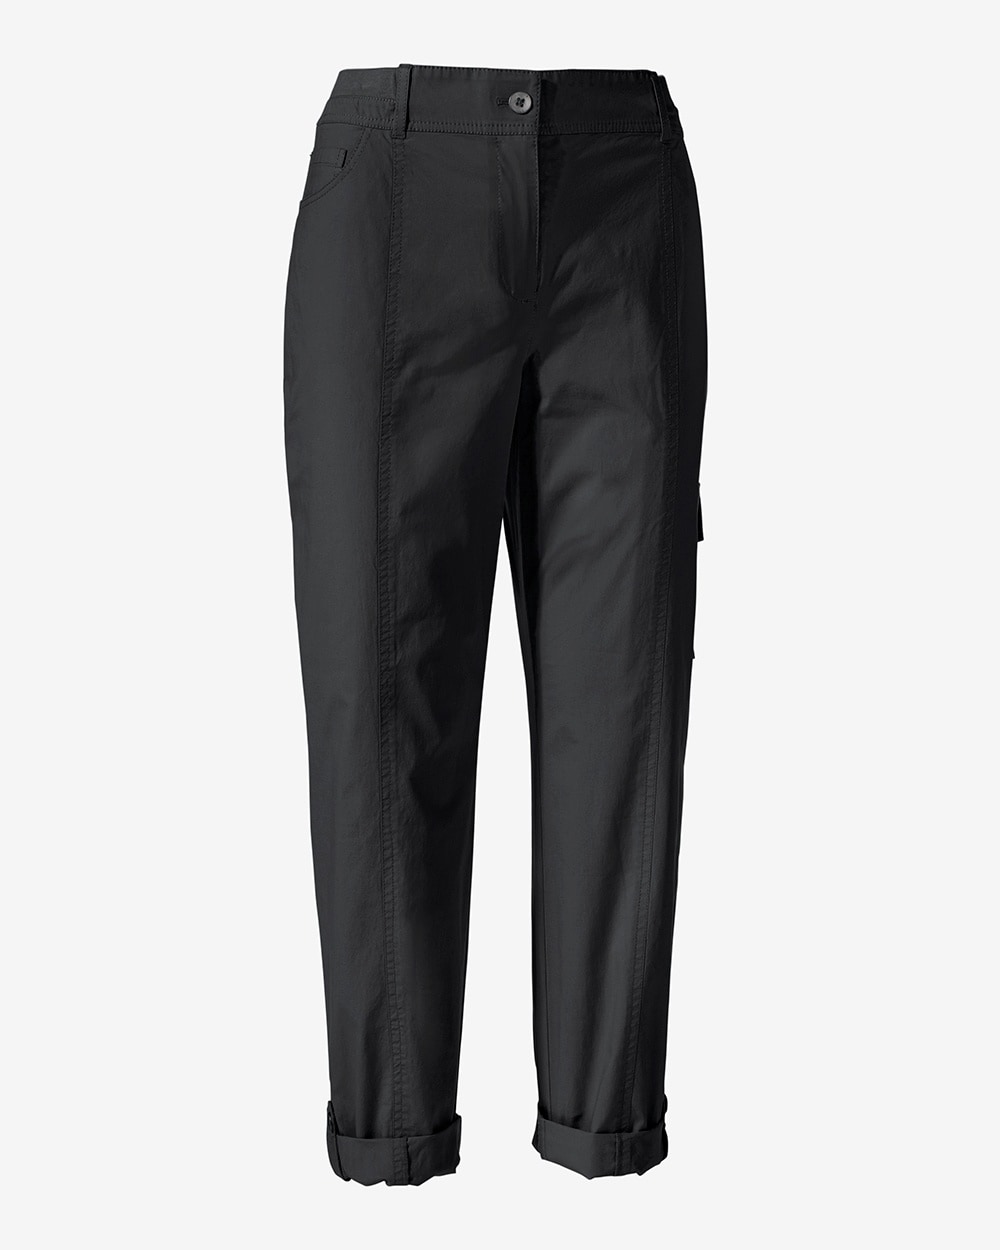 Fitigues Convertible Cuff Pants